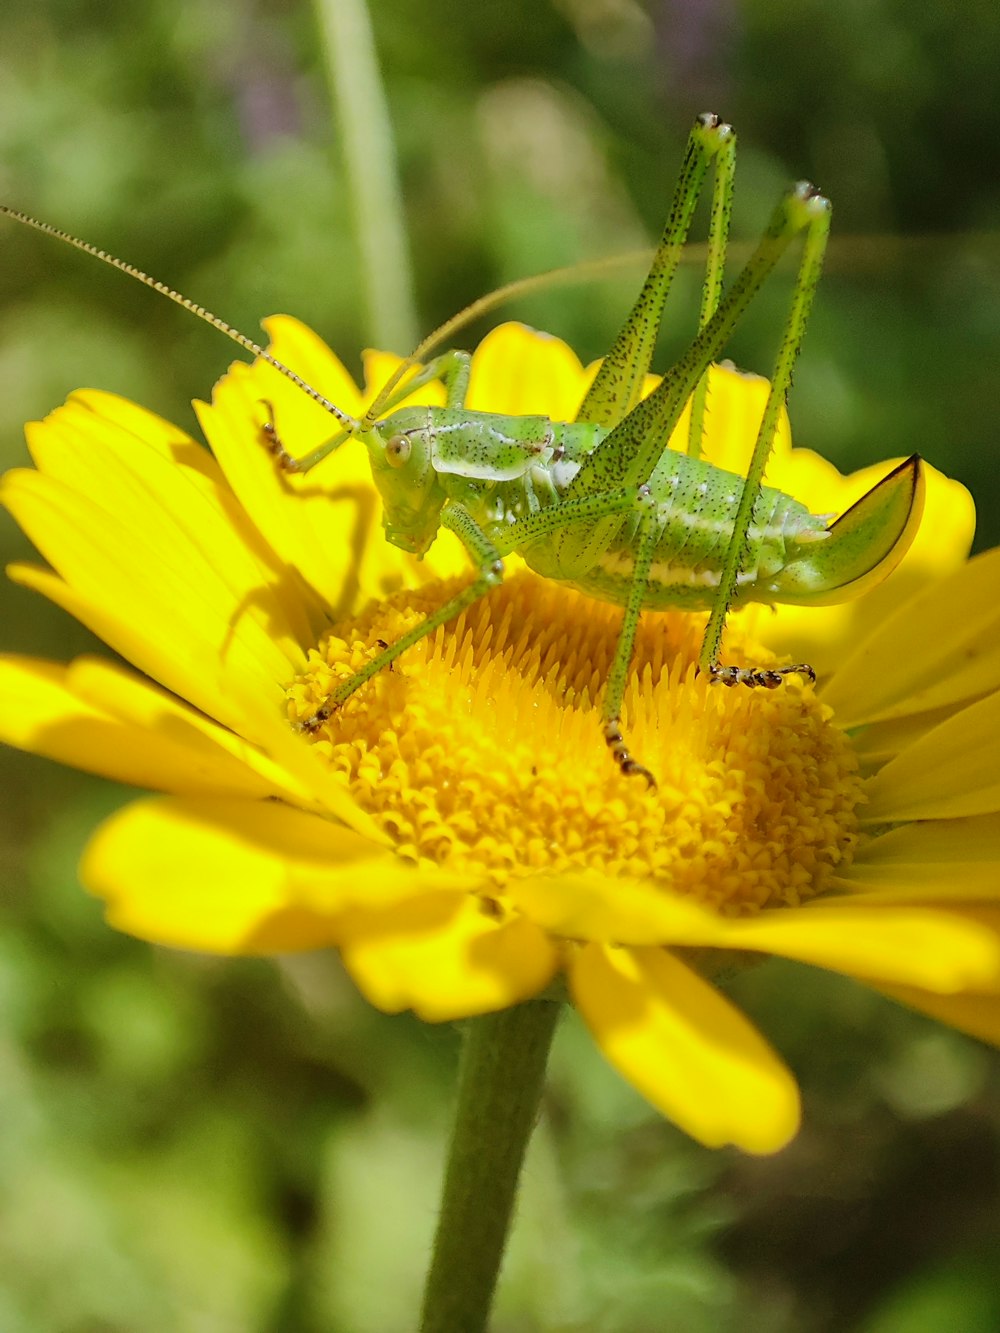 a close up of a grasshopper on a yellow flower